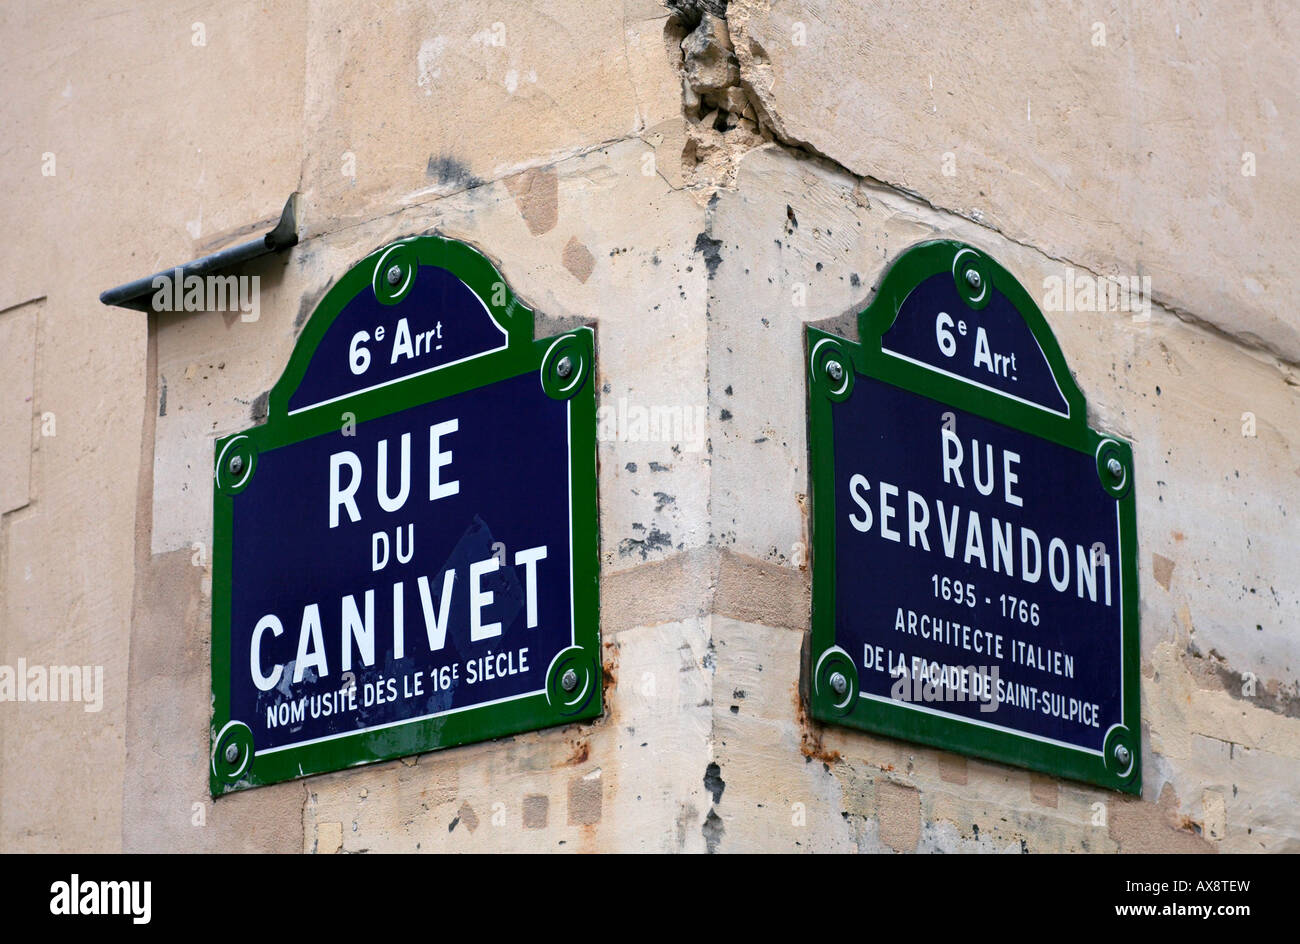 Street signs in the 6th Arrondissement of Paris France Stock Photo